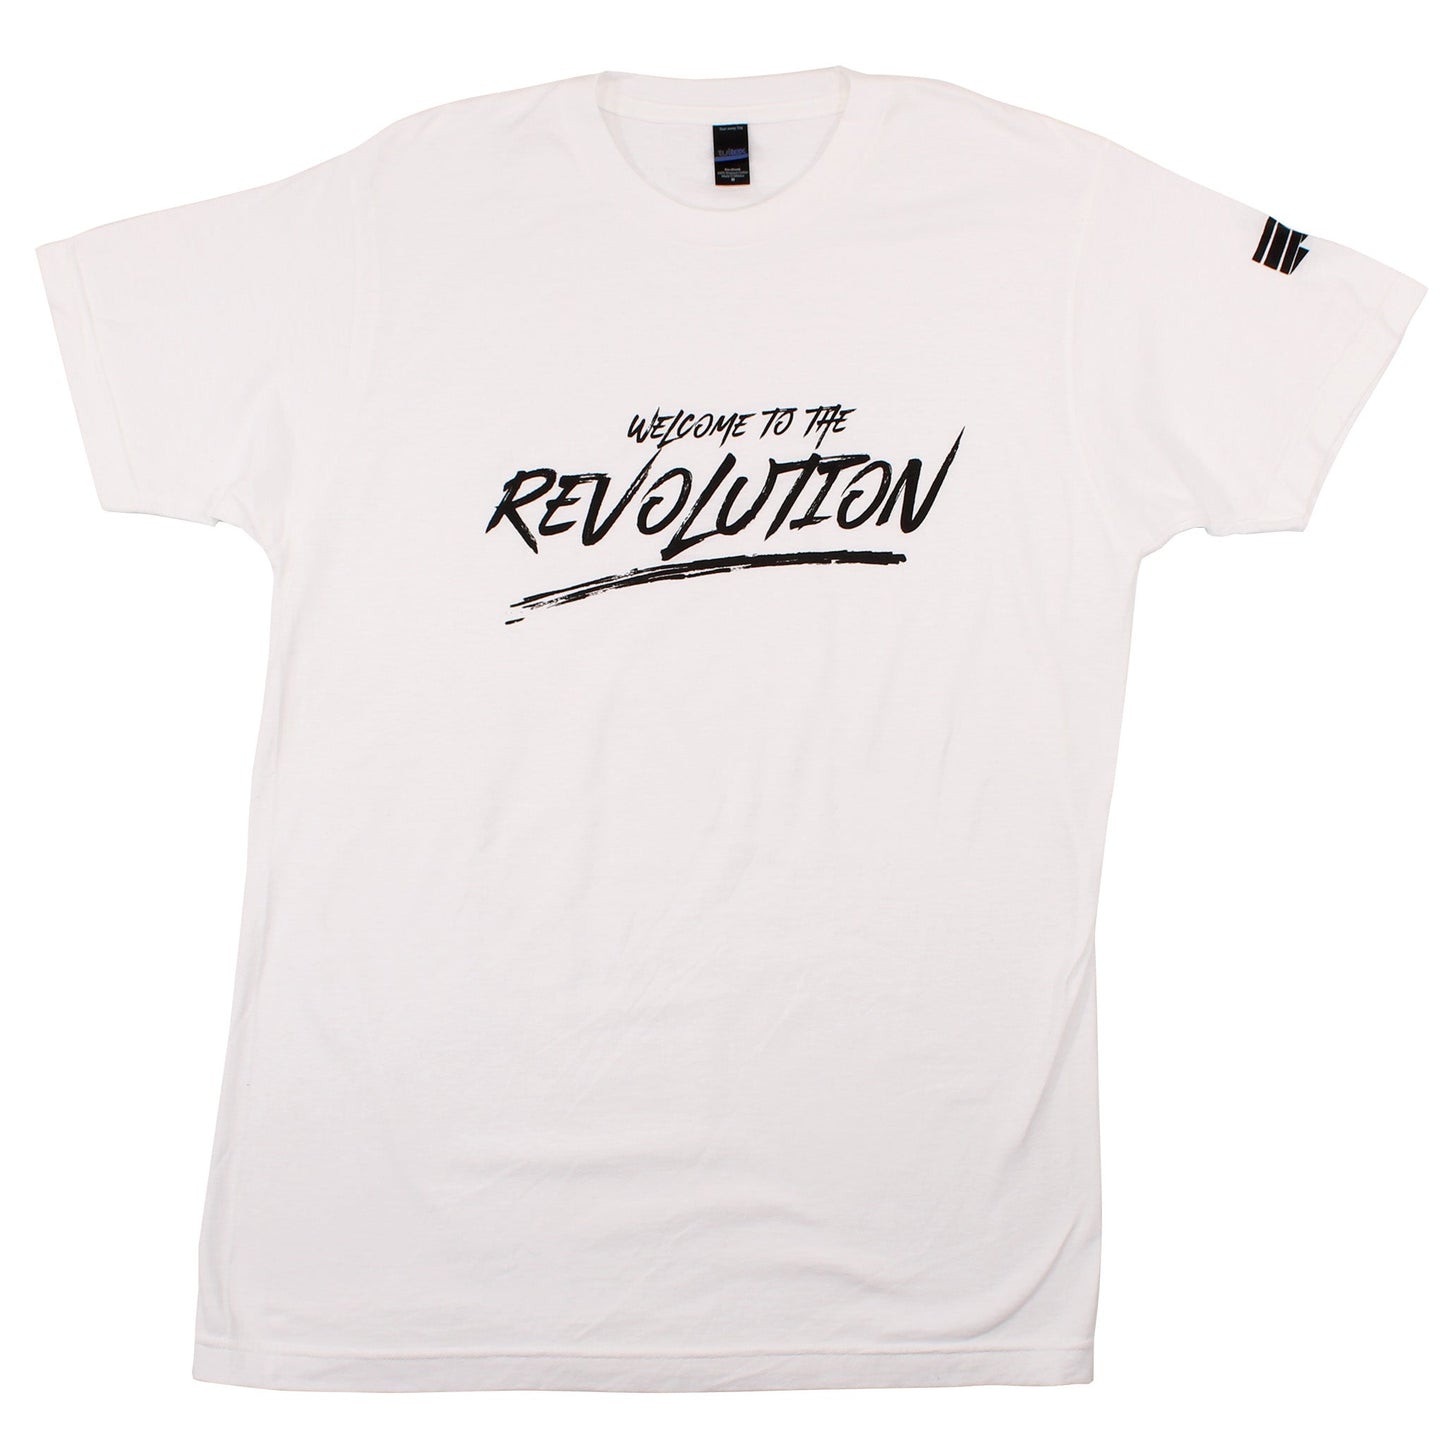 Welcome to the Revolution Tee (White)